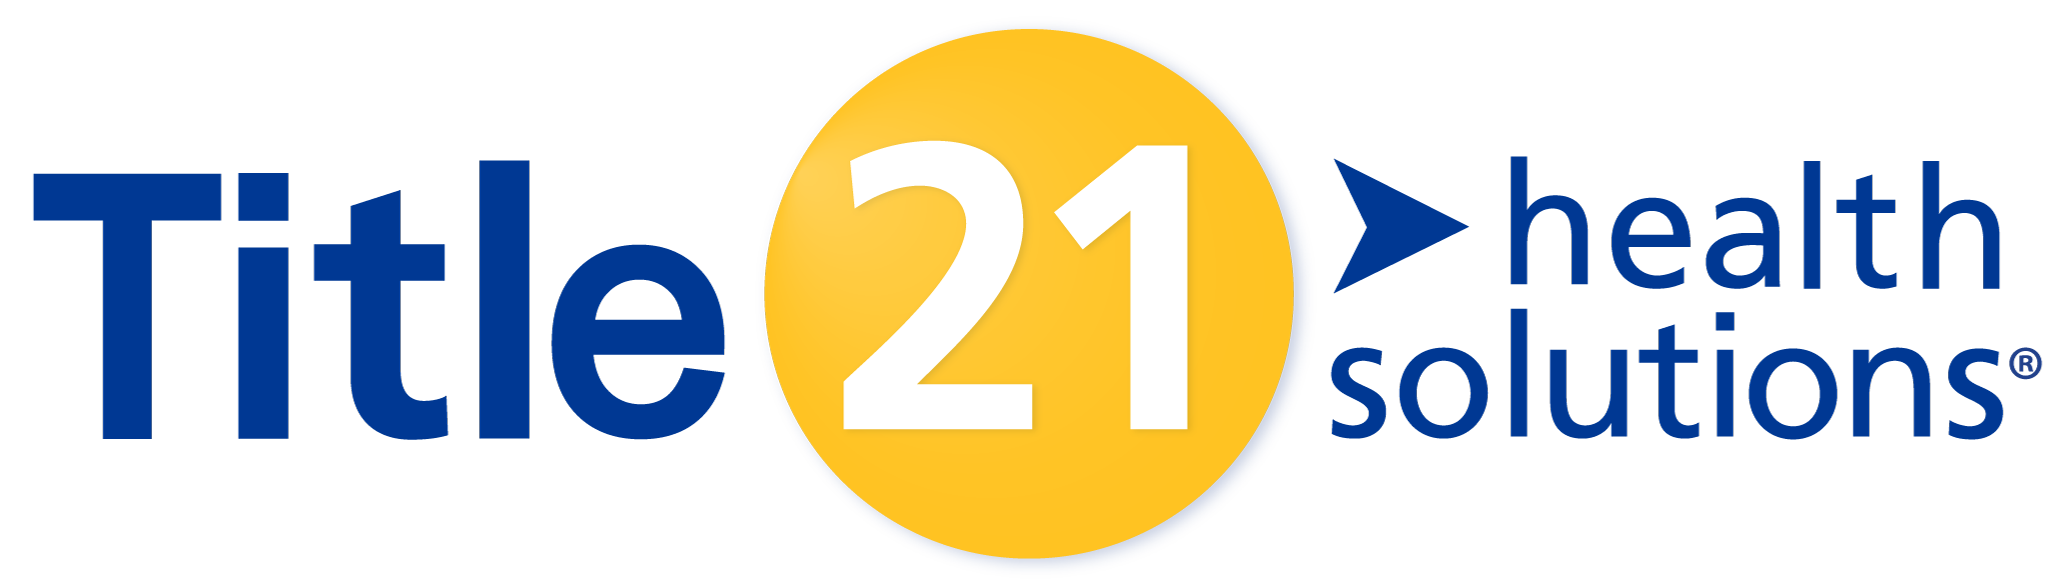 Title21 Health Solutions Logo